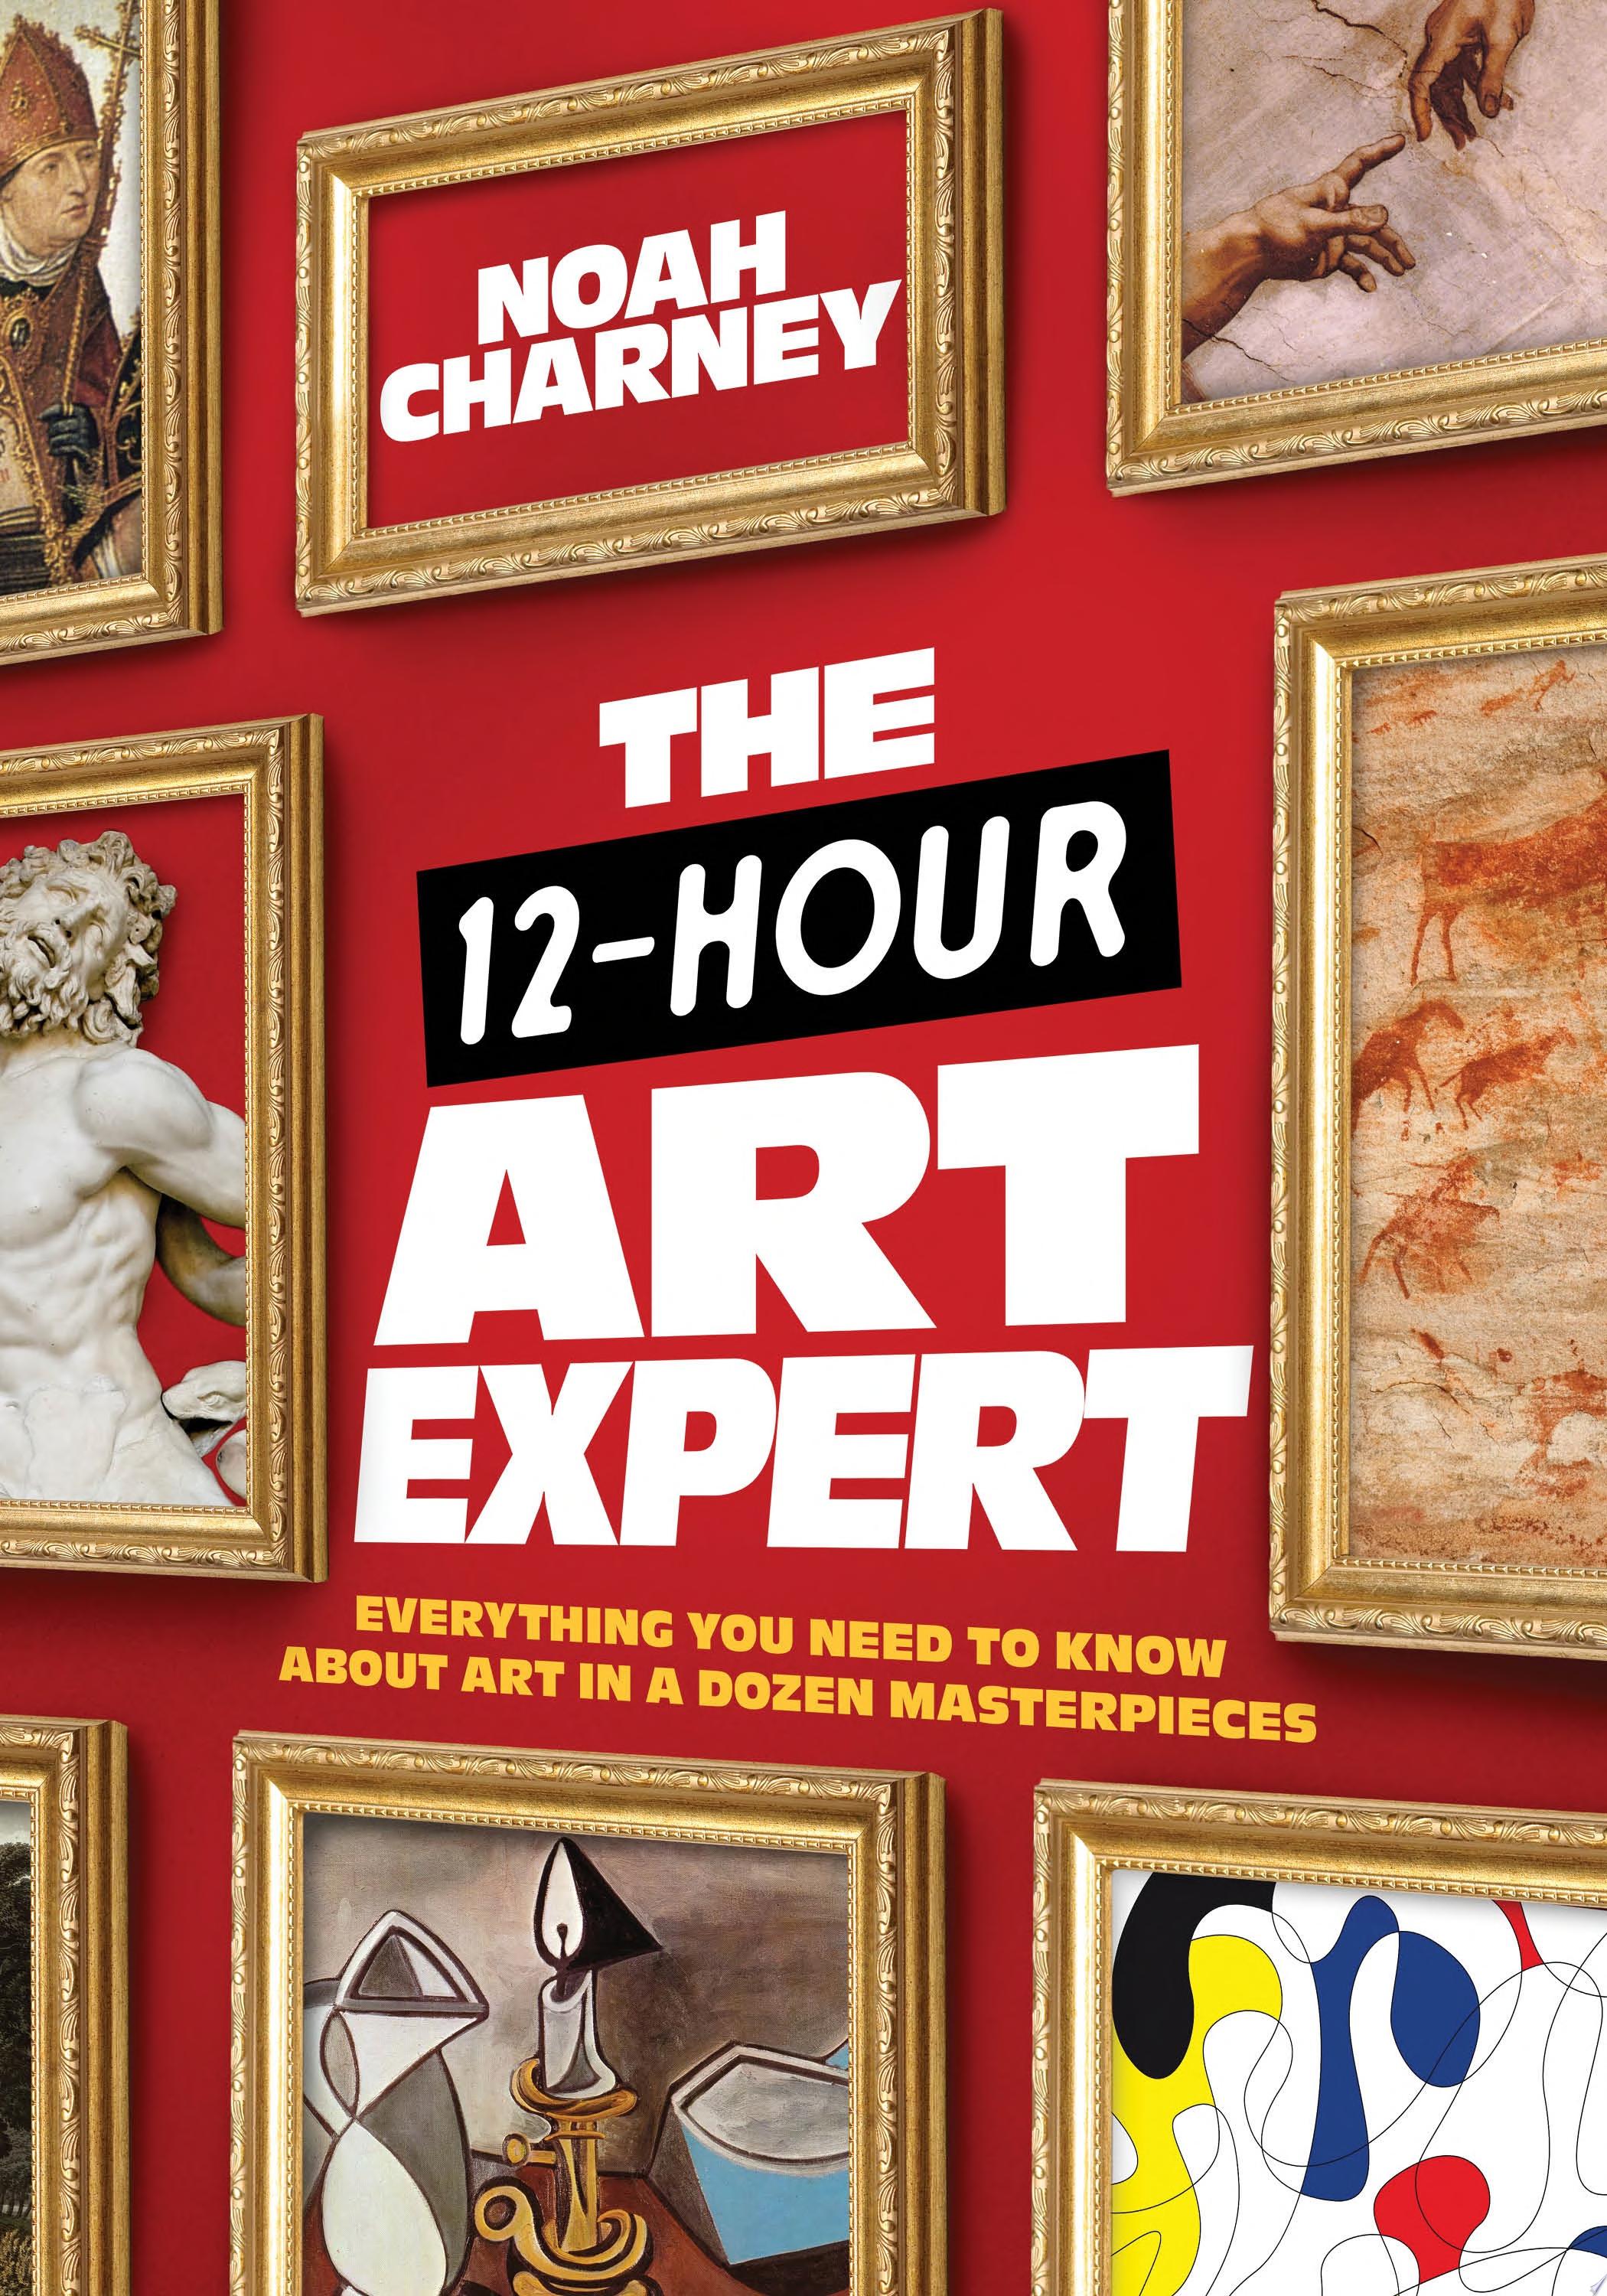 Image for "The 12-Hour Art Expert"